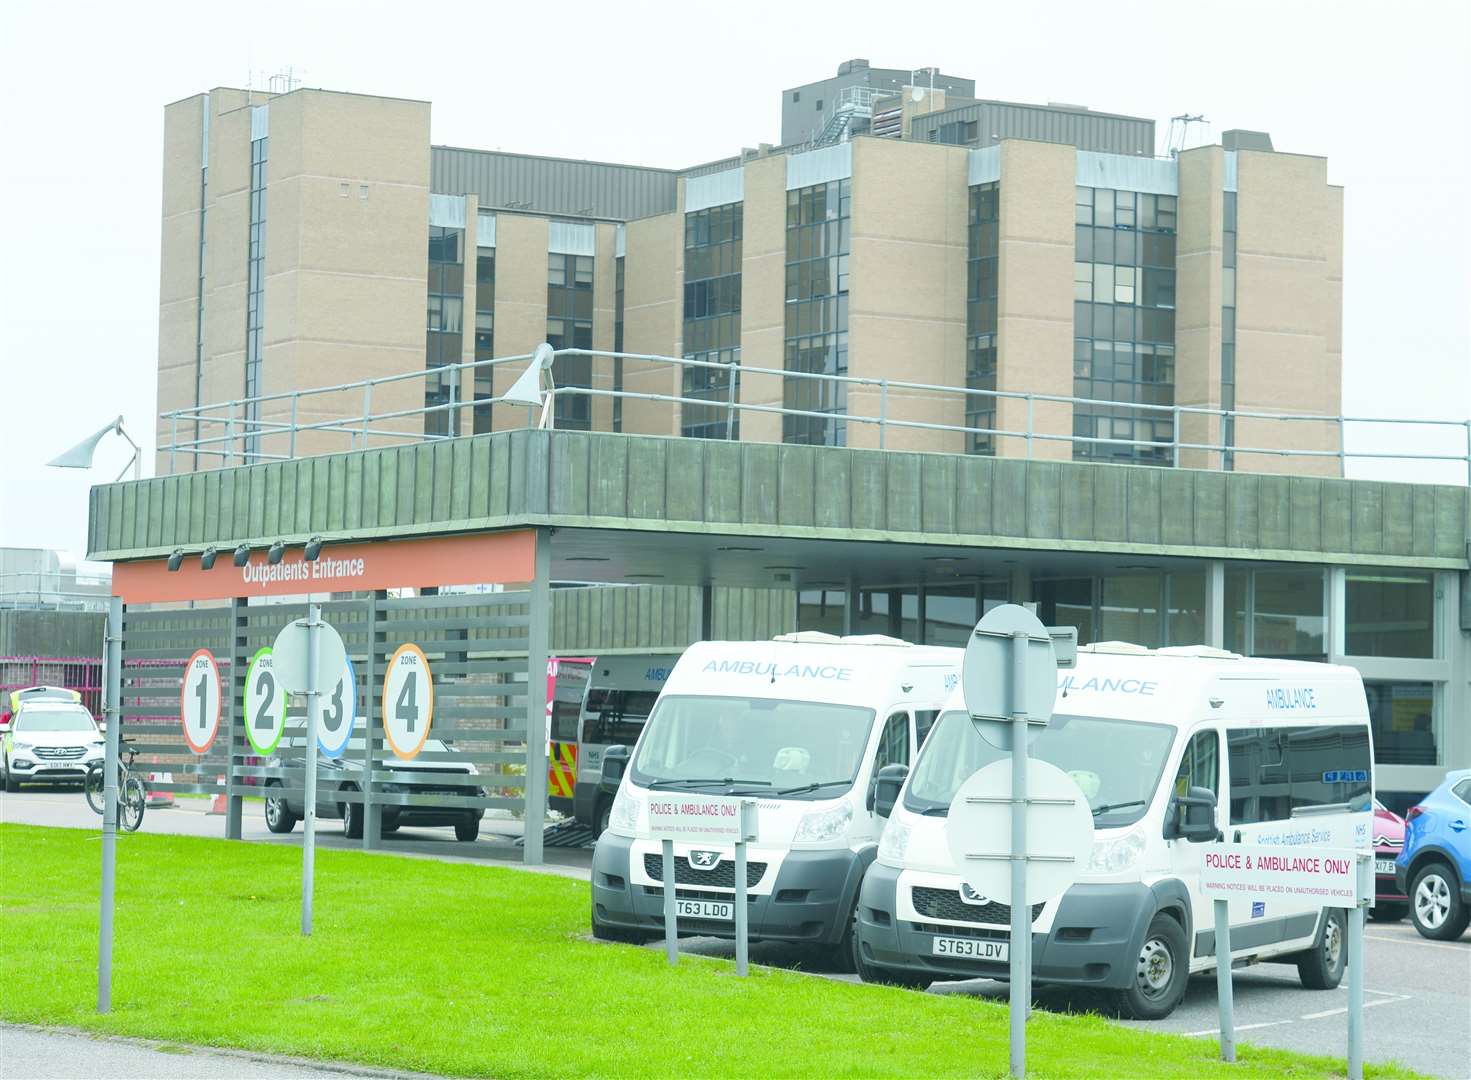 Two wards at Raigmore Hospital in Inverness have closed to new admissions due to cases of coronavirus and norovirus.